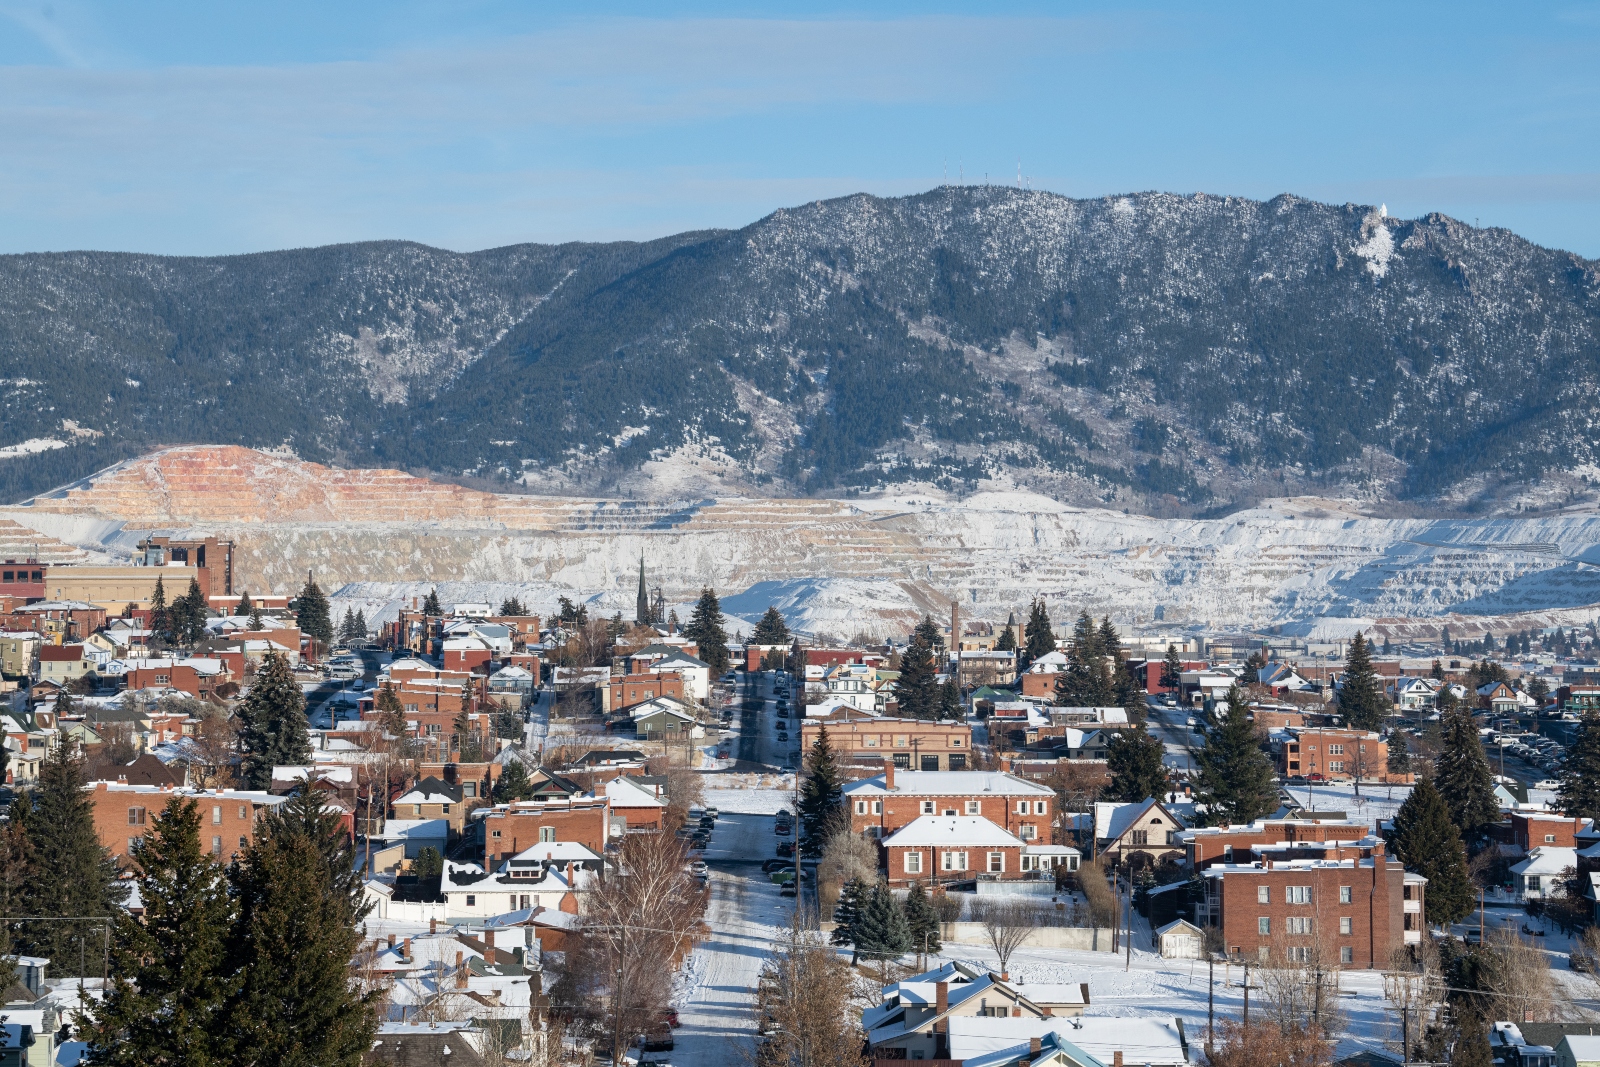 An aerial view of a snow-covered Montana town in the foothills of a mountain, with a mine scraped out in the foothills of the mountain